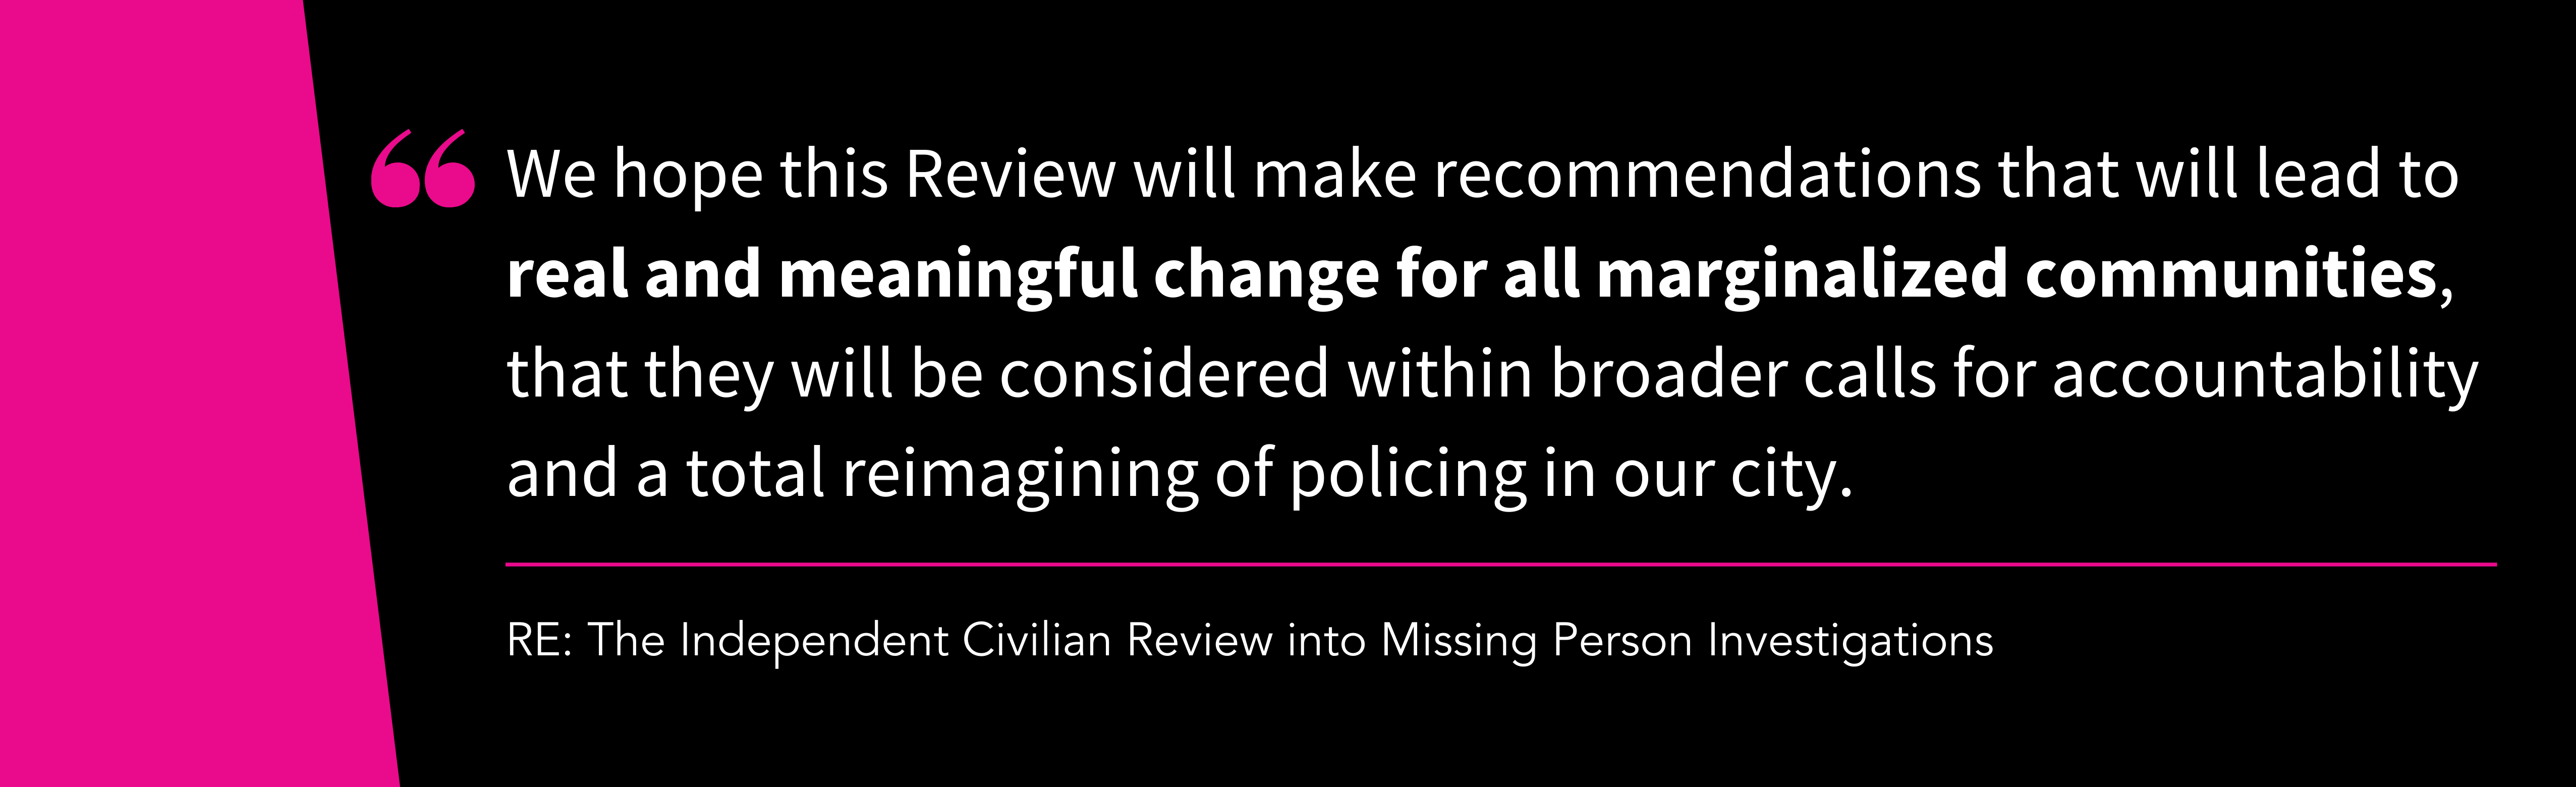 Independent Civilian Review into Missing Person Investigations: Grieving and hoping together